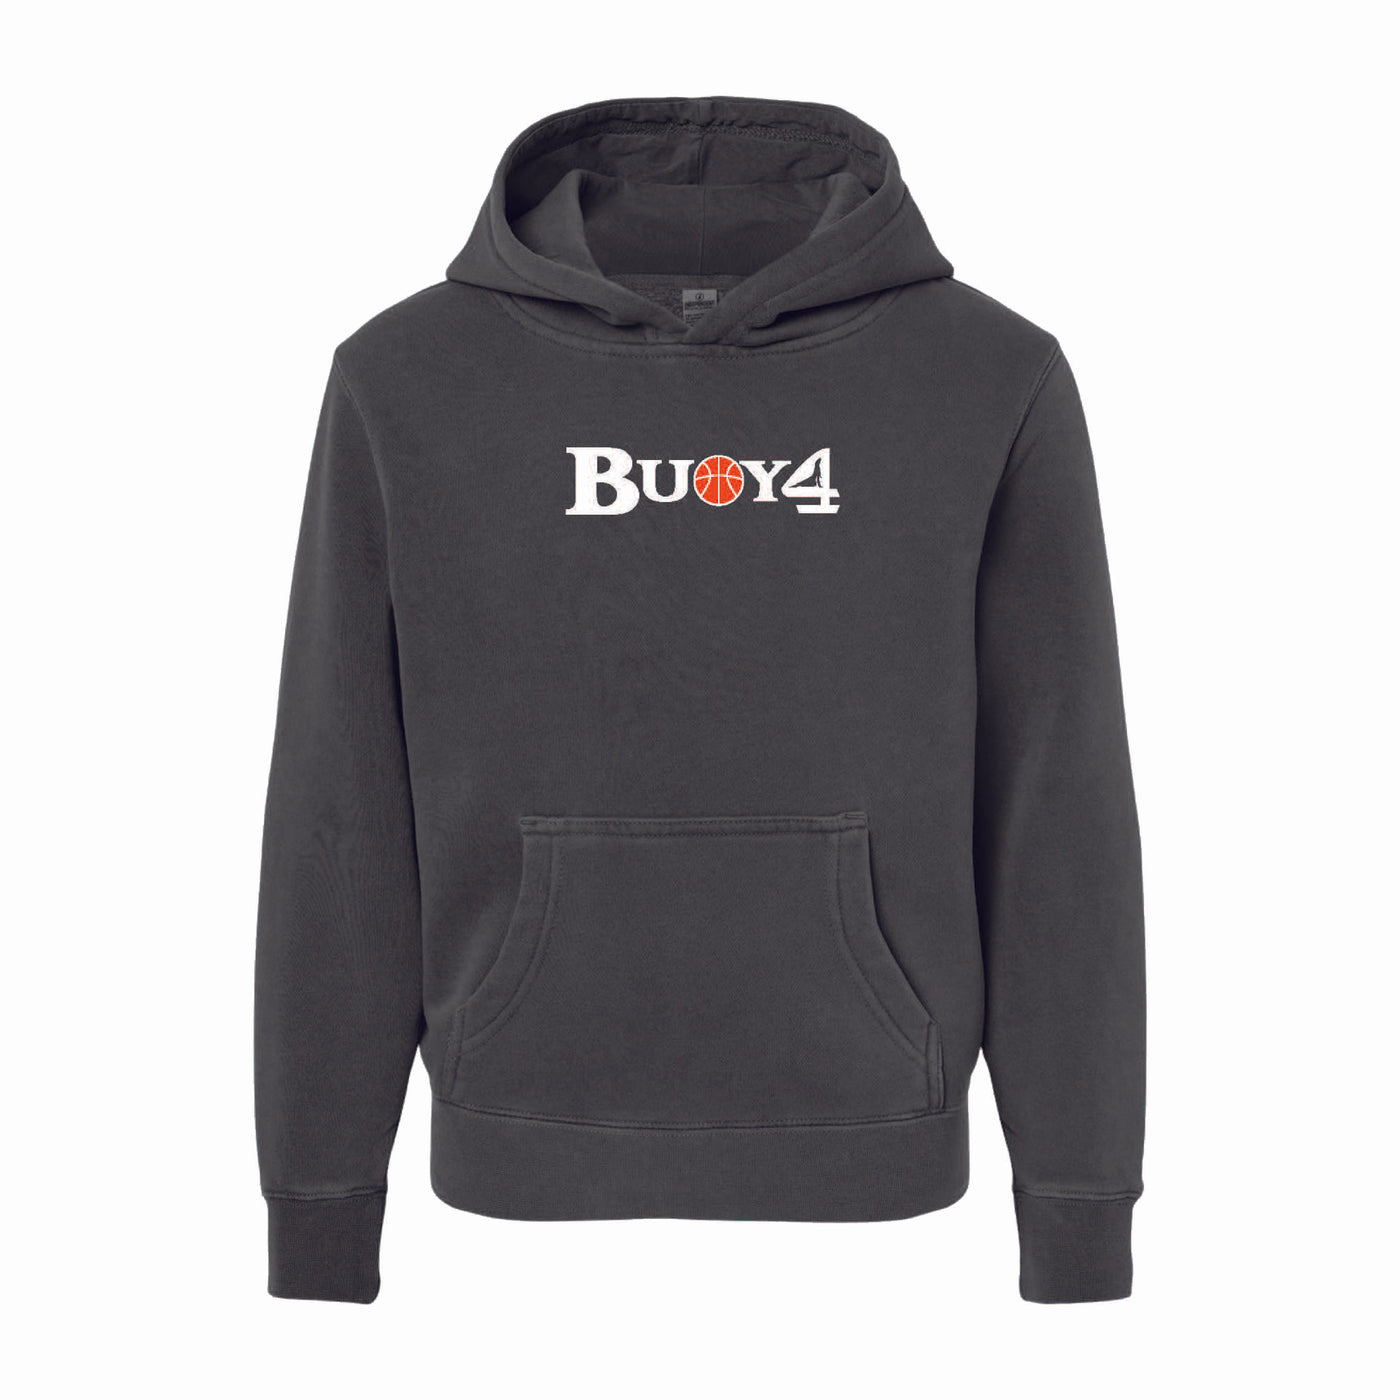 March Madness Heavyweight Hoodie (Charcoal)